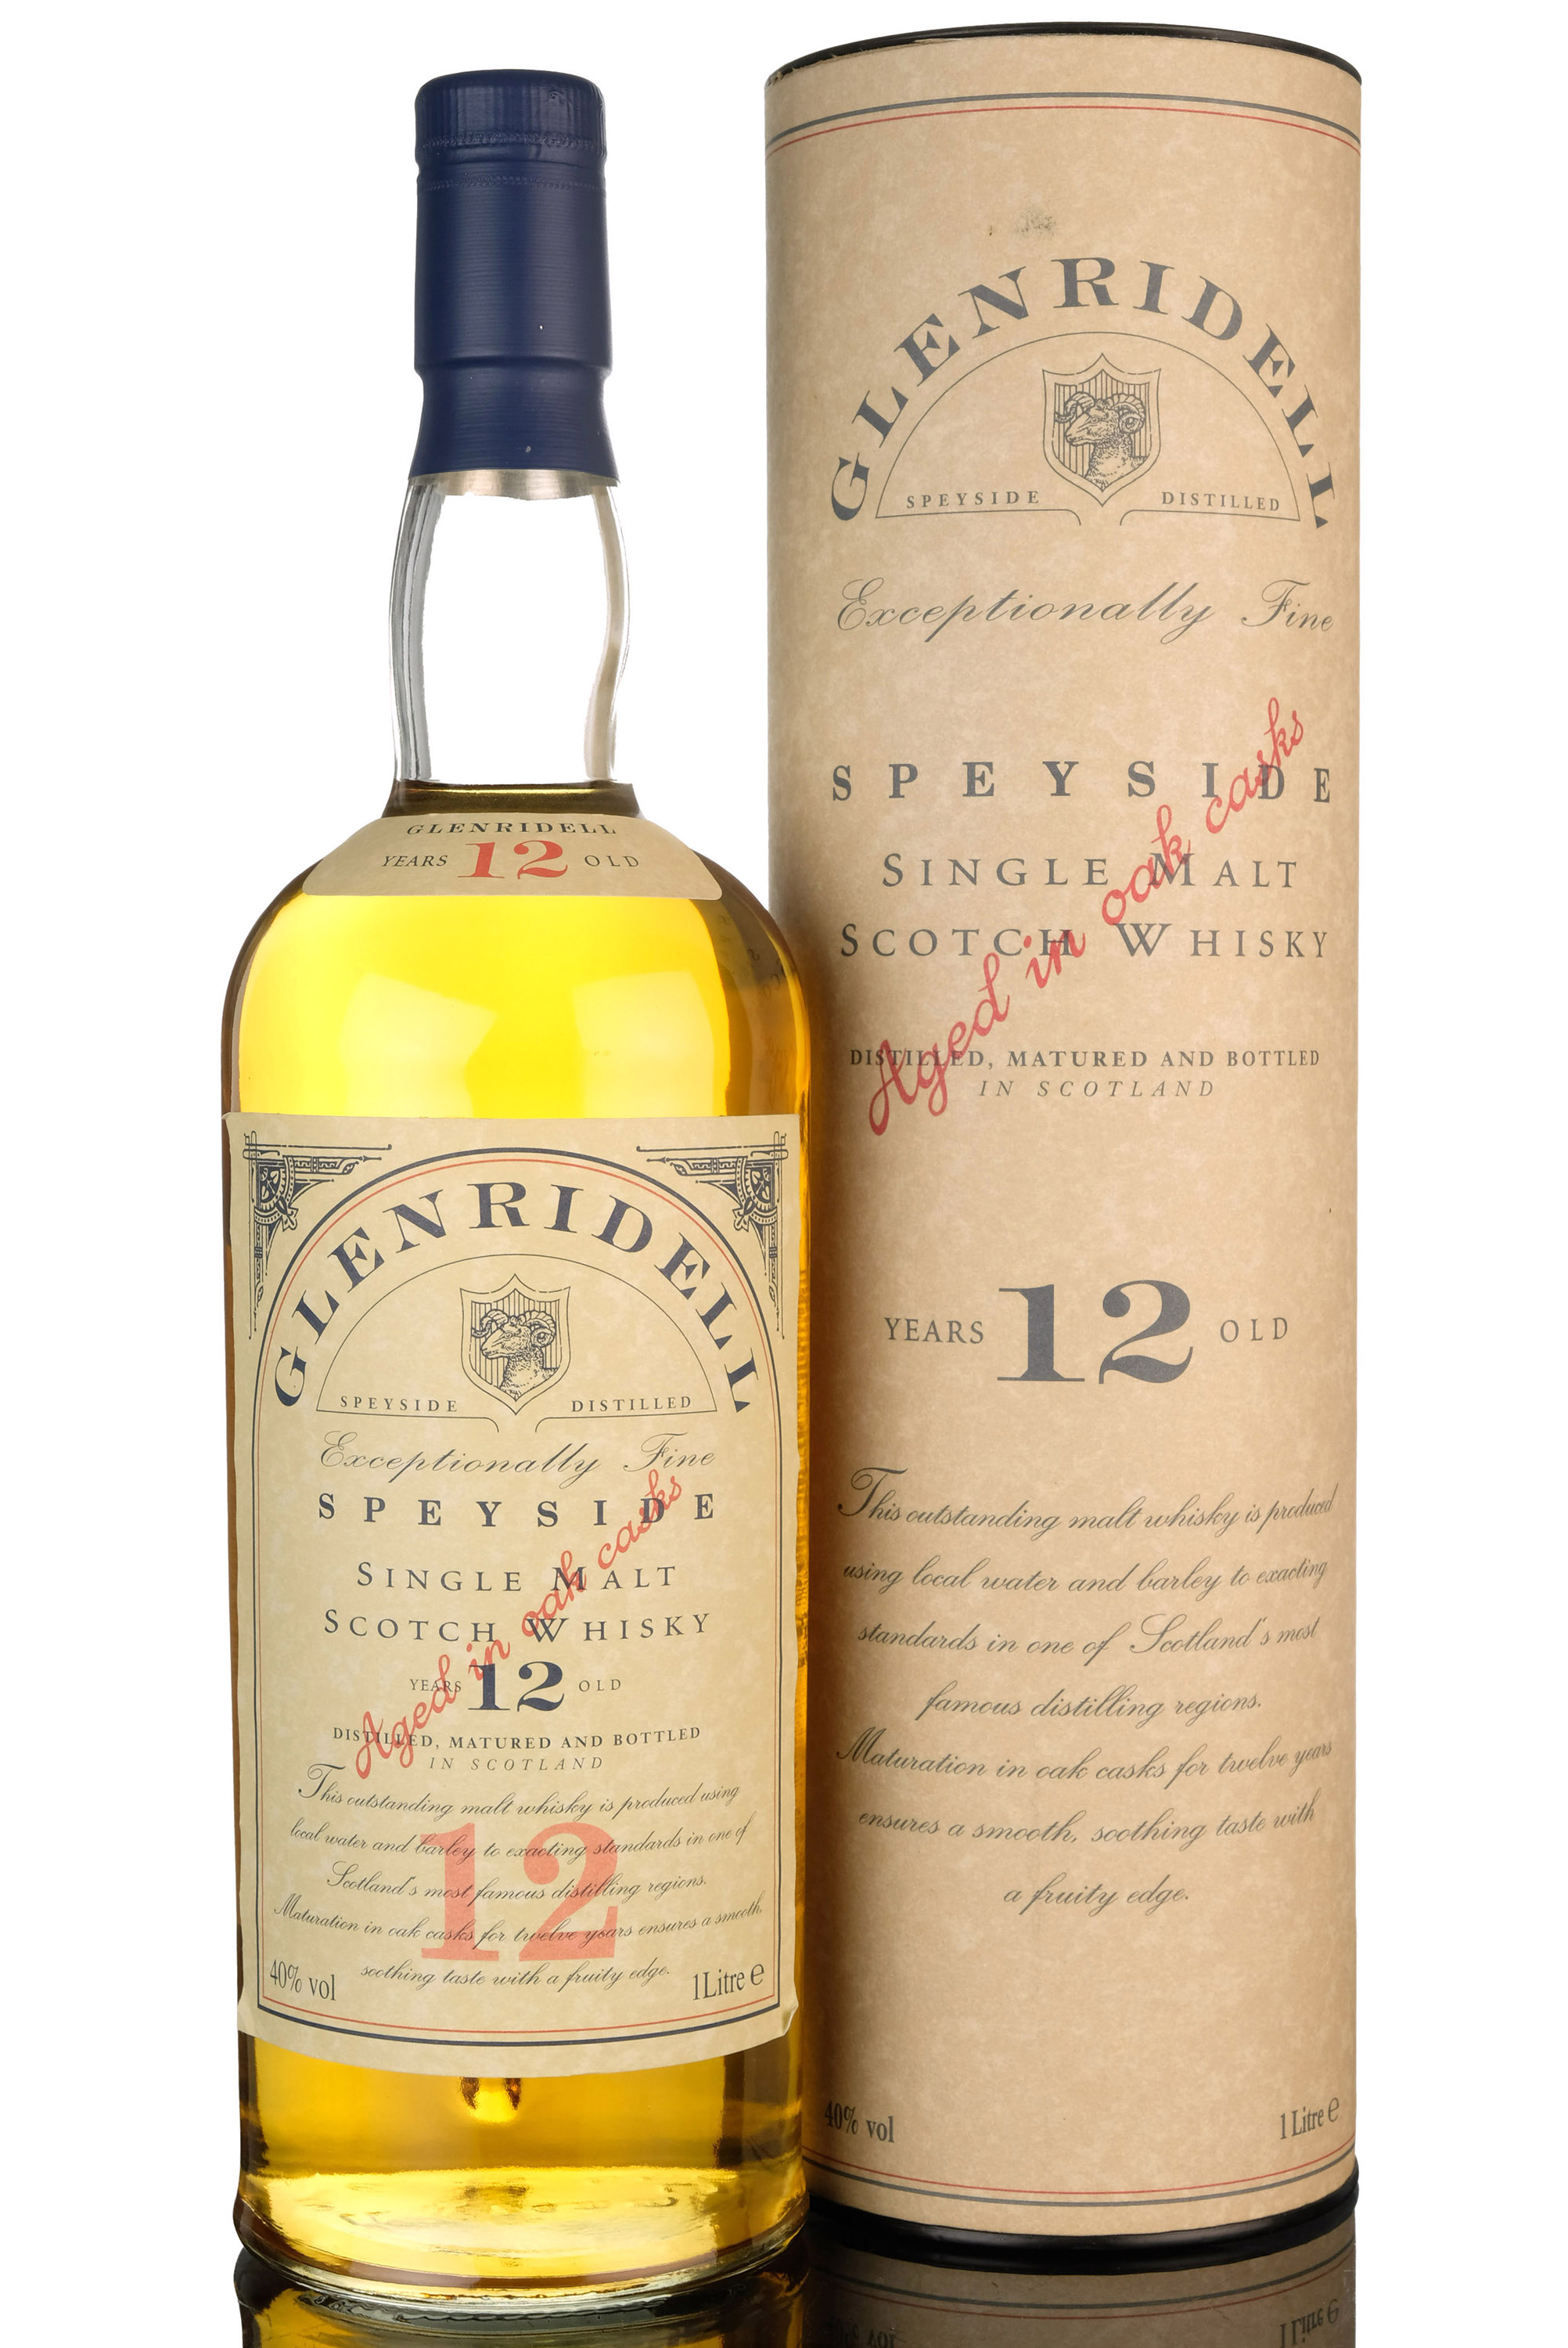 Glenridell 12 Year Old - 1990s - 1 Litre